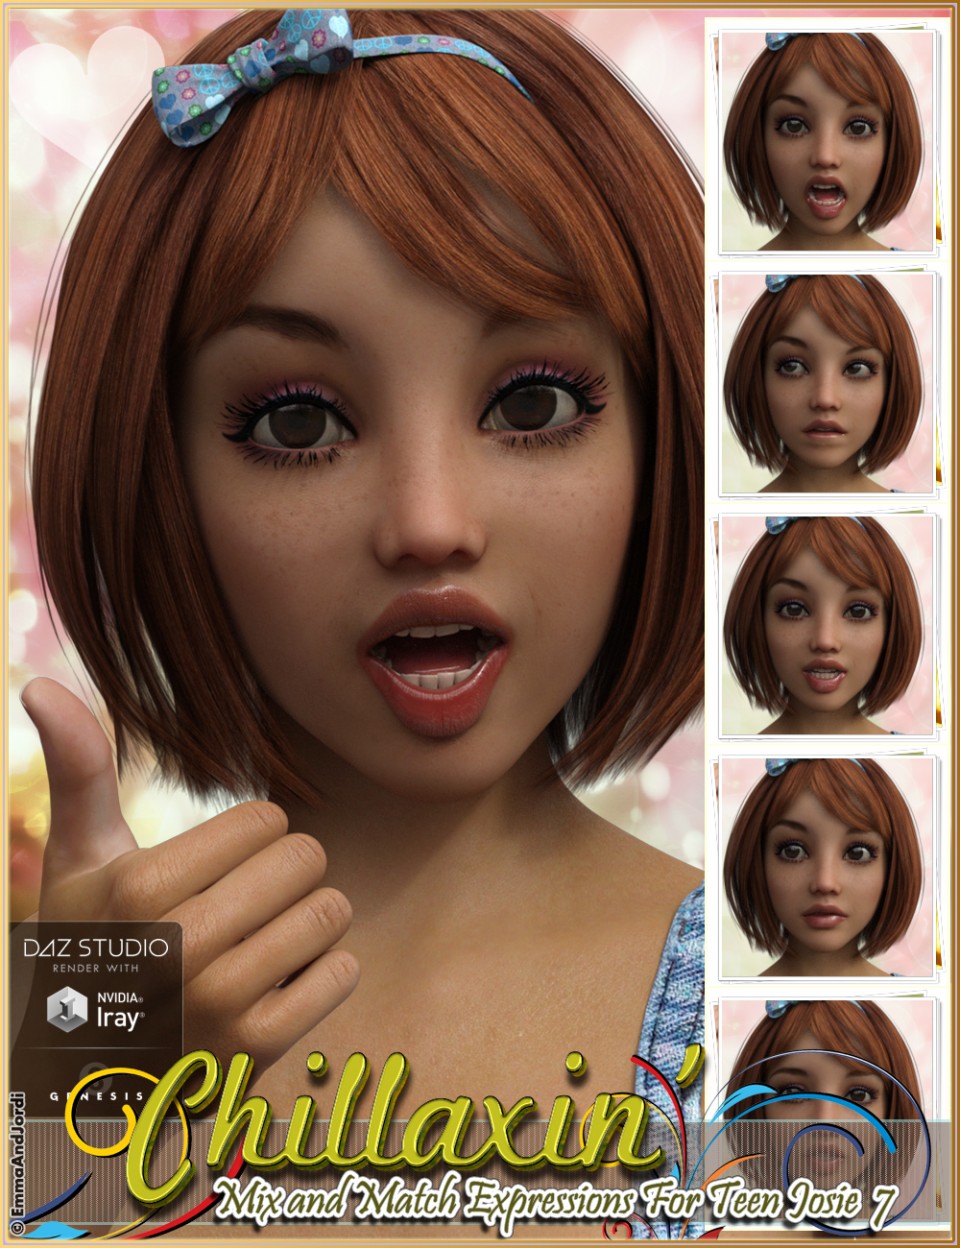 Chillaxin’ Mix and Match Expressions for Teen Josie 7_DAZ3DDL